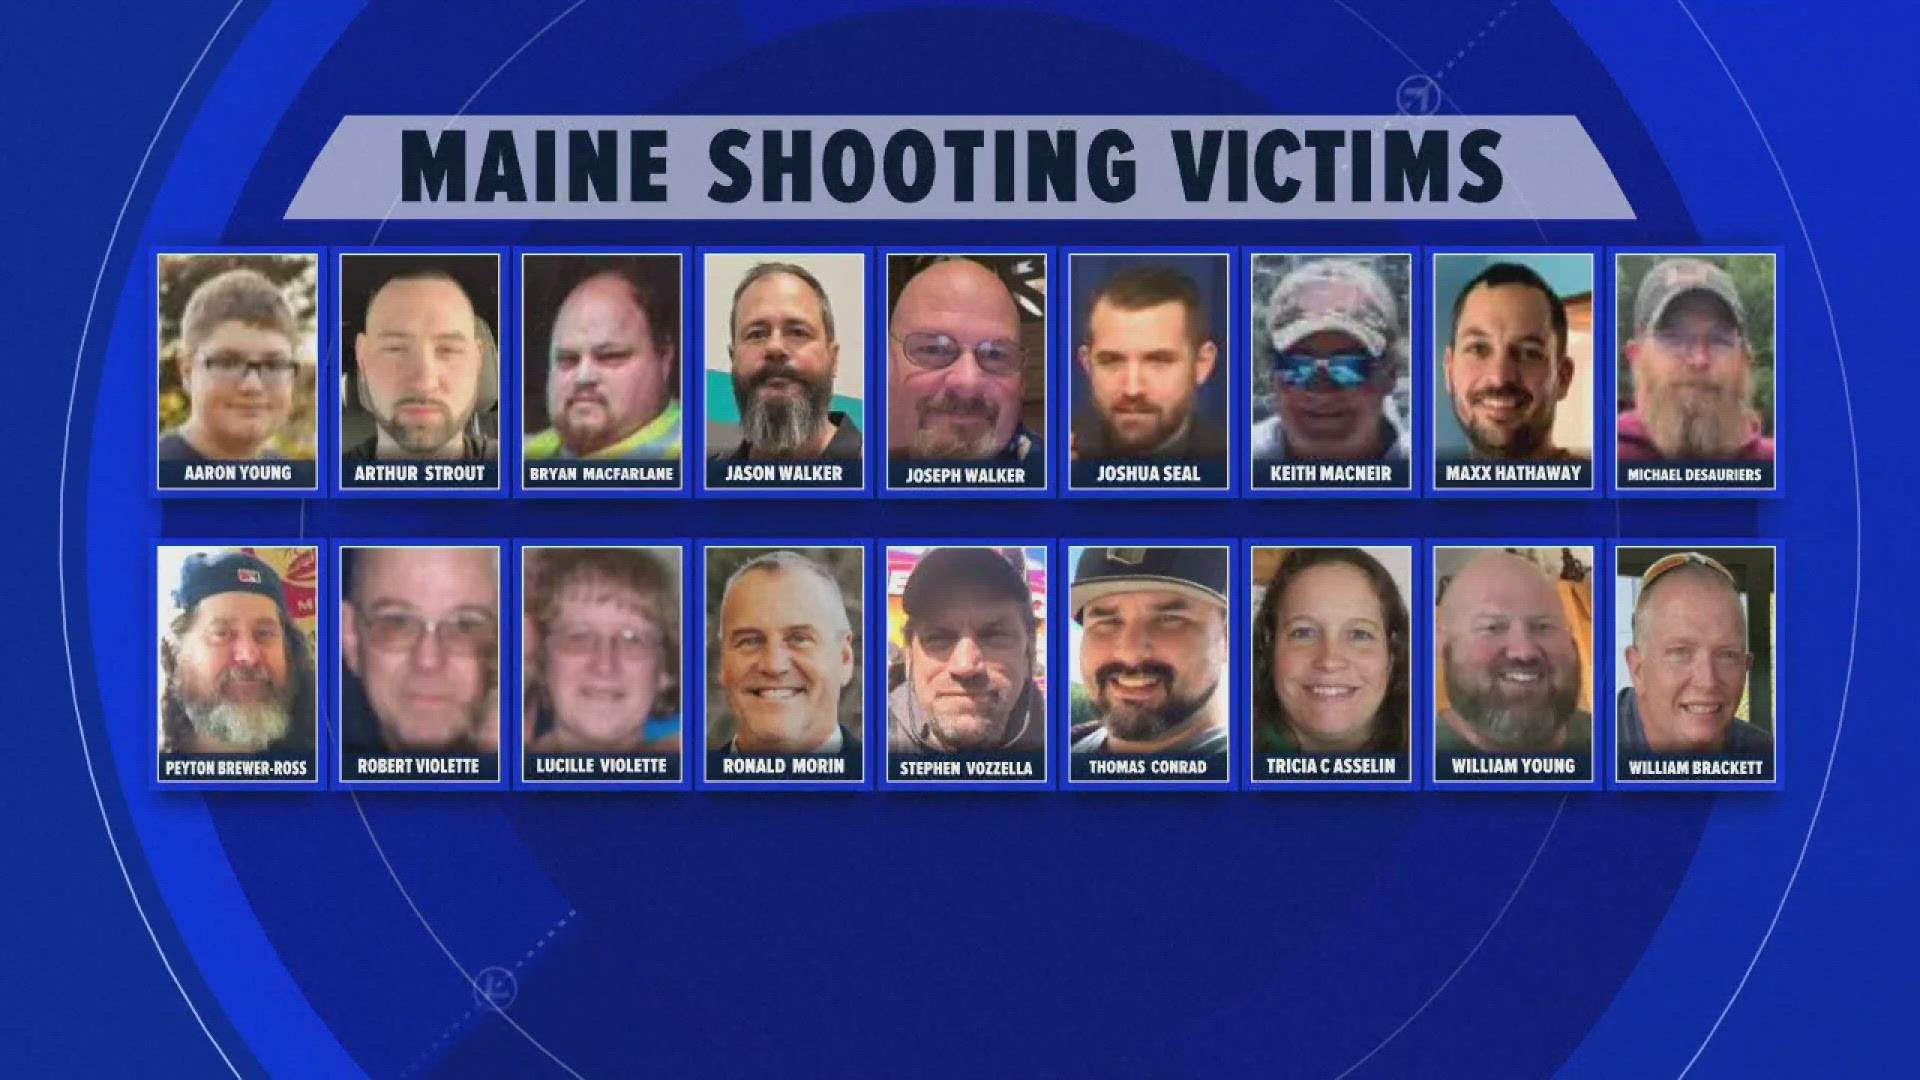 18 people lost their lives when a gunman opened fire at a bowling alley and at a bar on Wednesday night, leading to a 48-hour manhunt for the suspect.